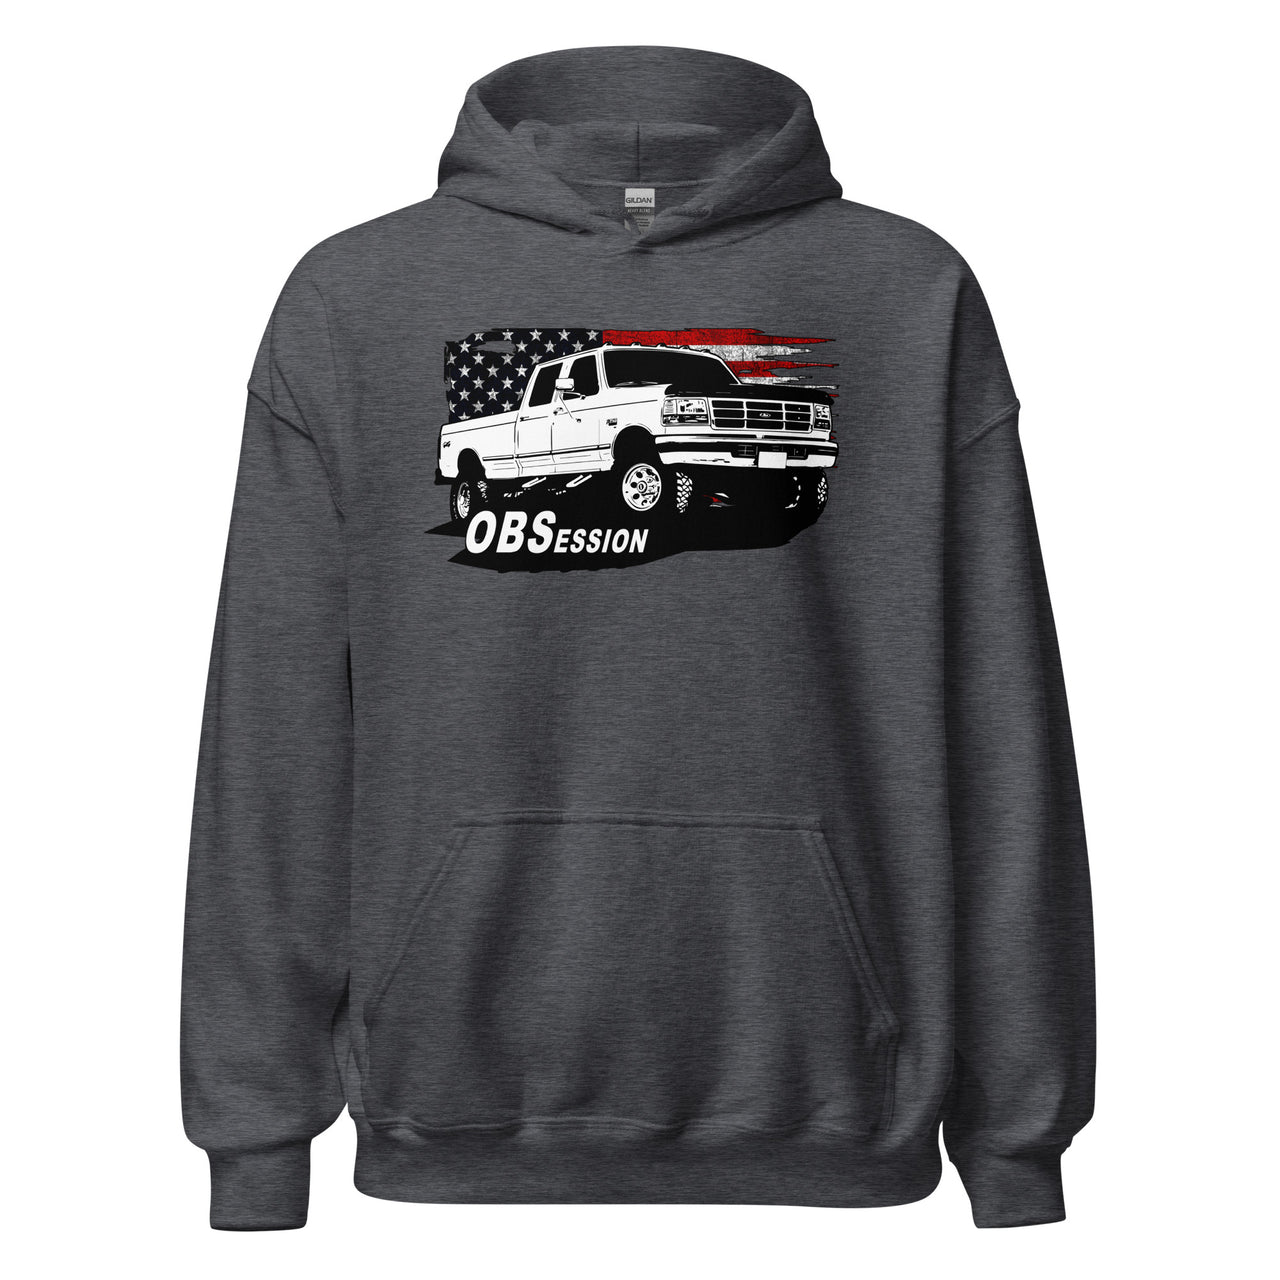 OBS Crew Cab Truck Hoodie with American Flag design - grey